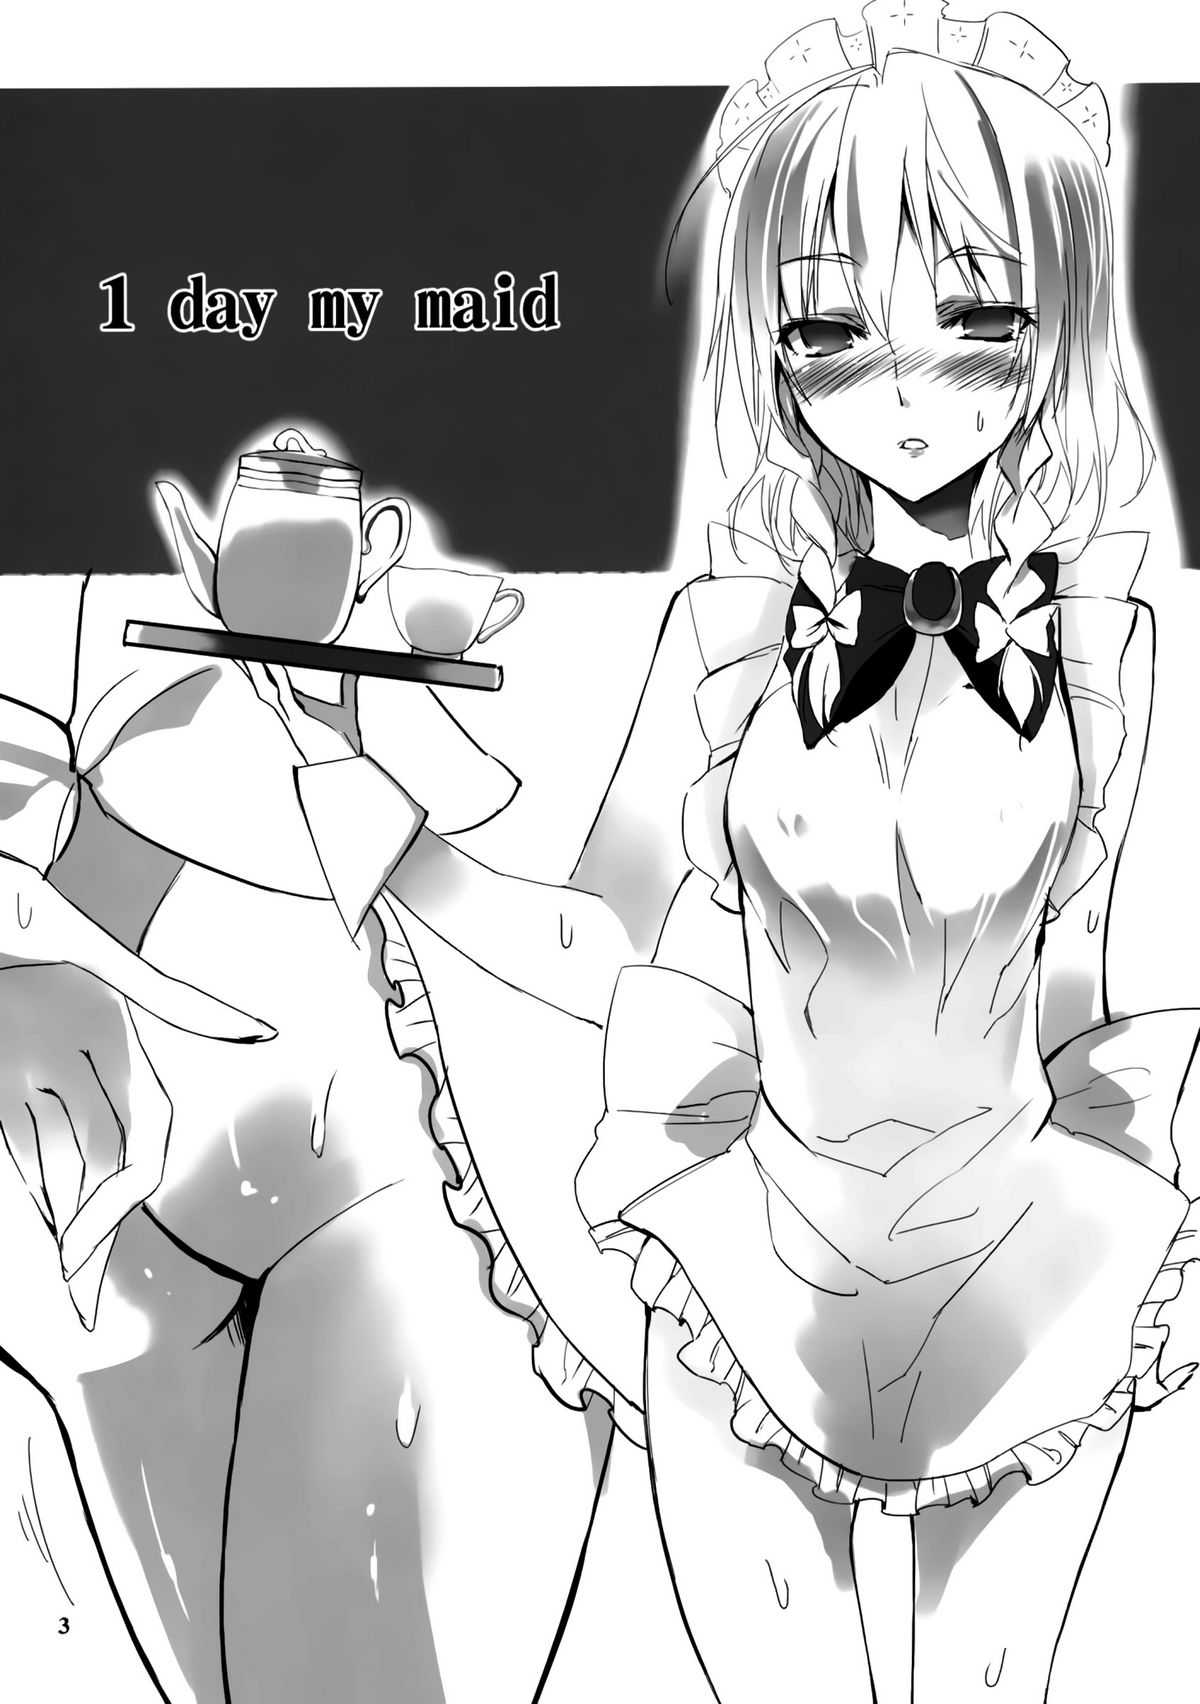 [KOTI (Atoshi)] 1 day my maid (Touhou Project) [English] =TV= [KOTI (Aとし)] 1 day my maid (東方Project) [英訳]